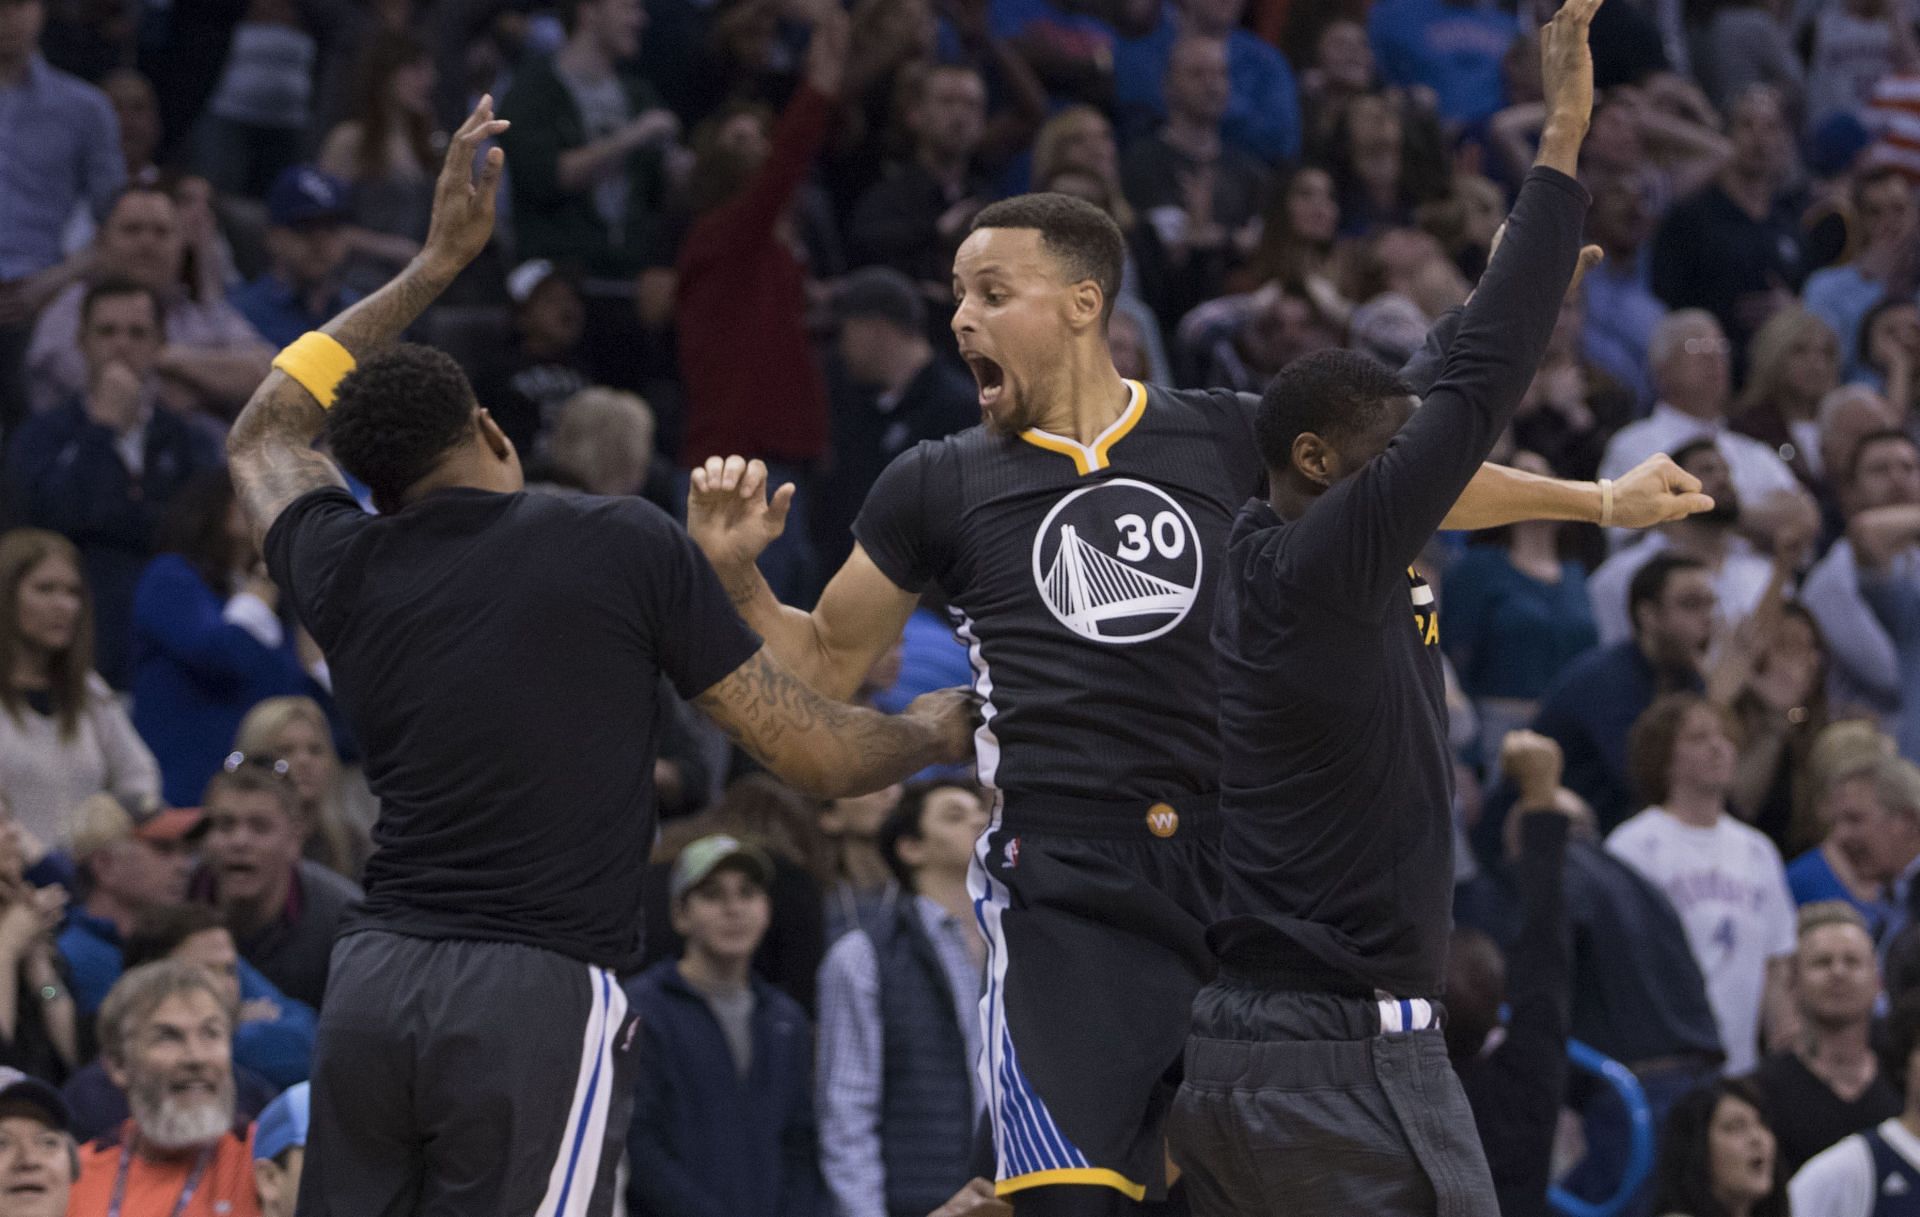 Steph Curry celebrating his greatest game-winner against the OKC Thunder back in 2016.